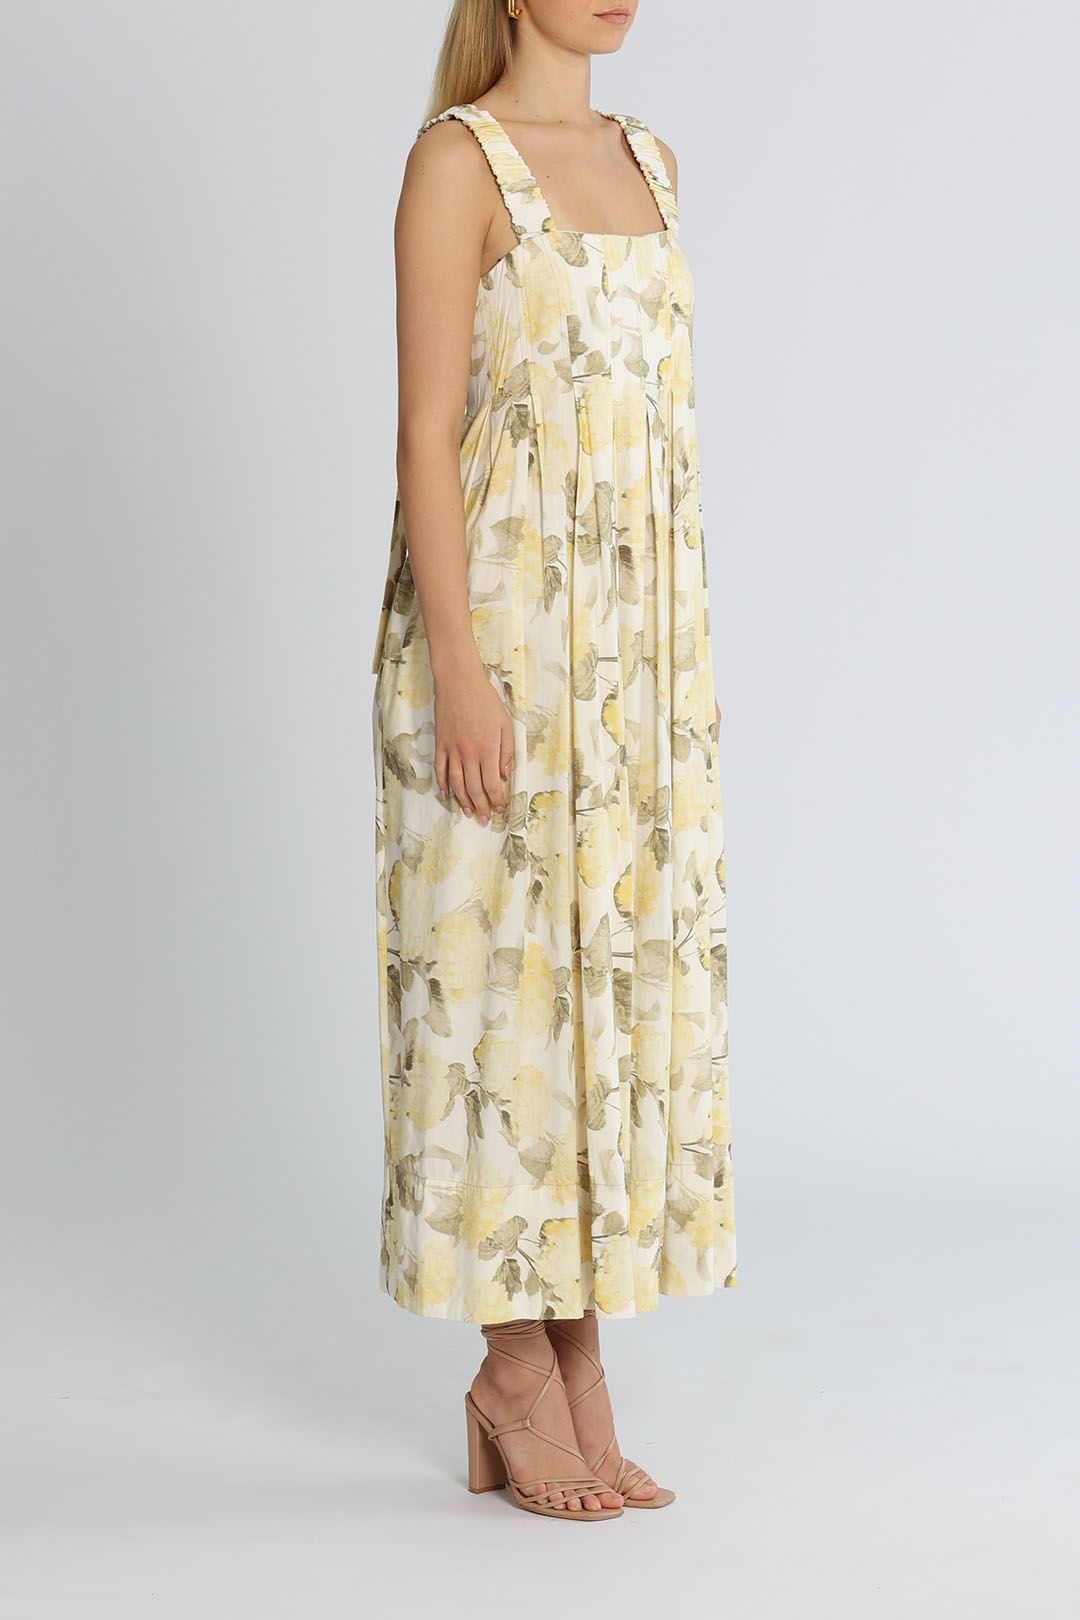 Acler Exeter Dress Floral Pleats